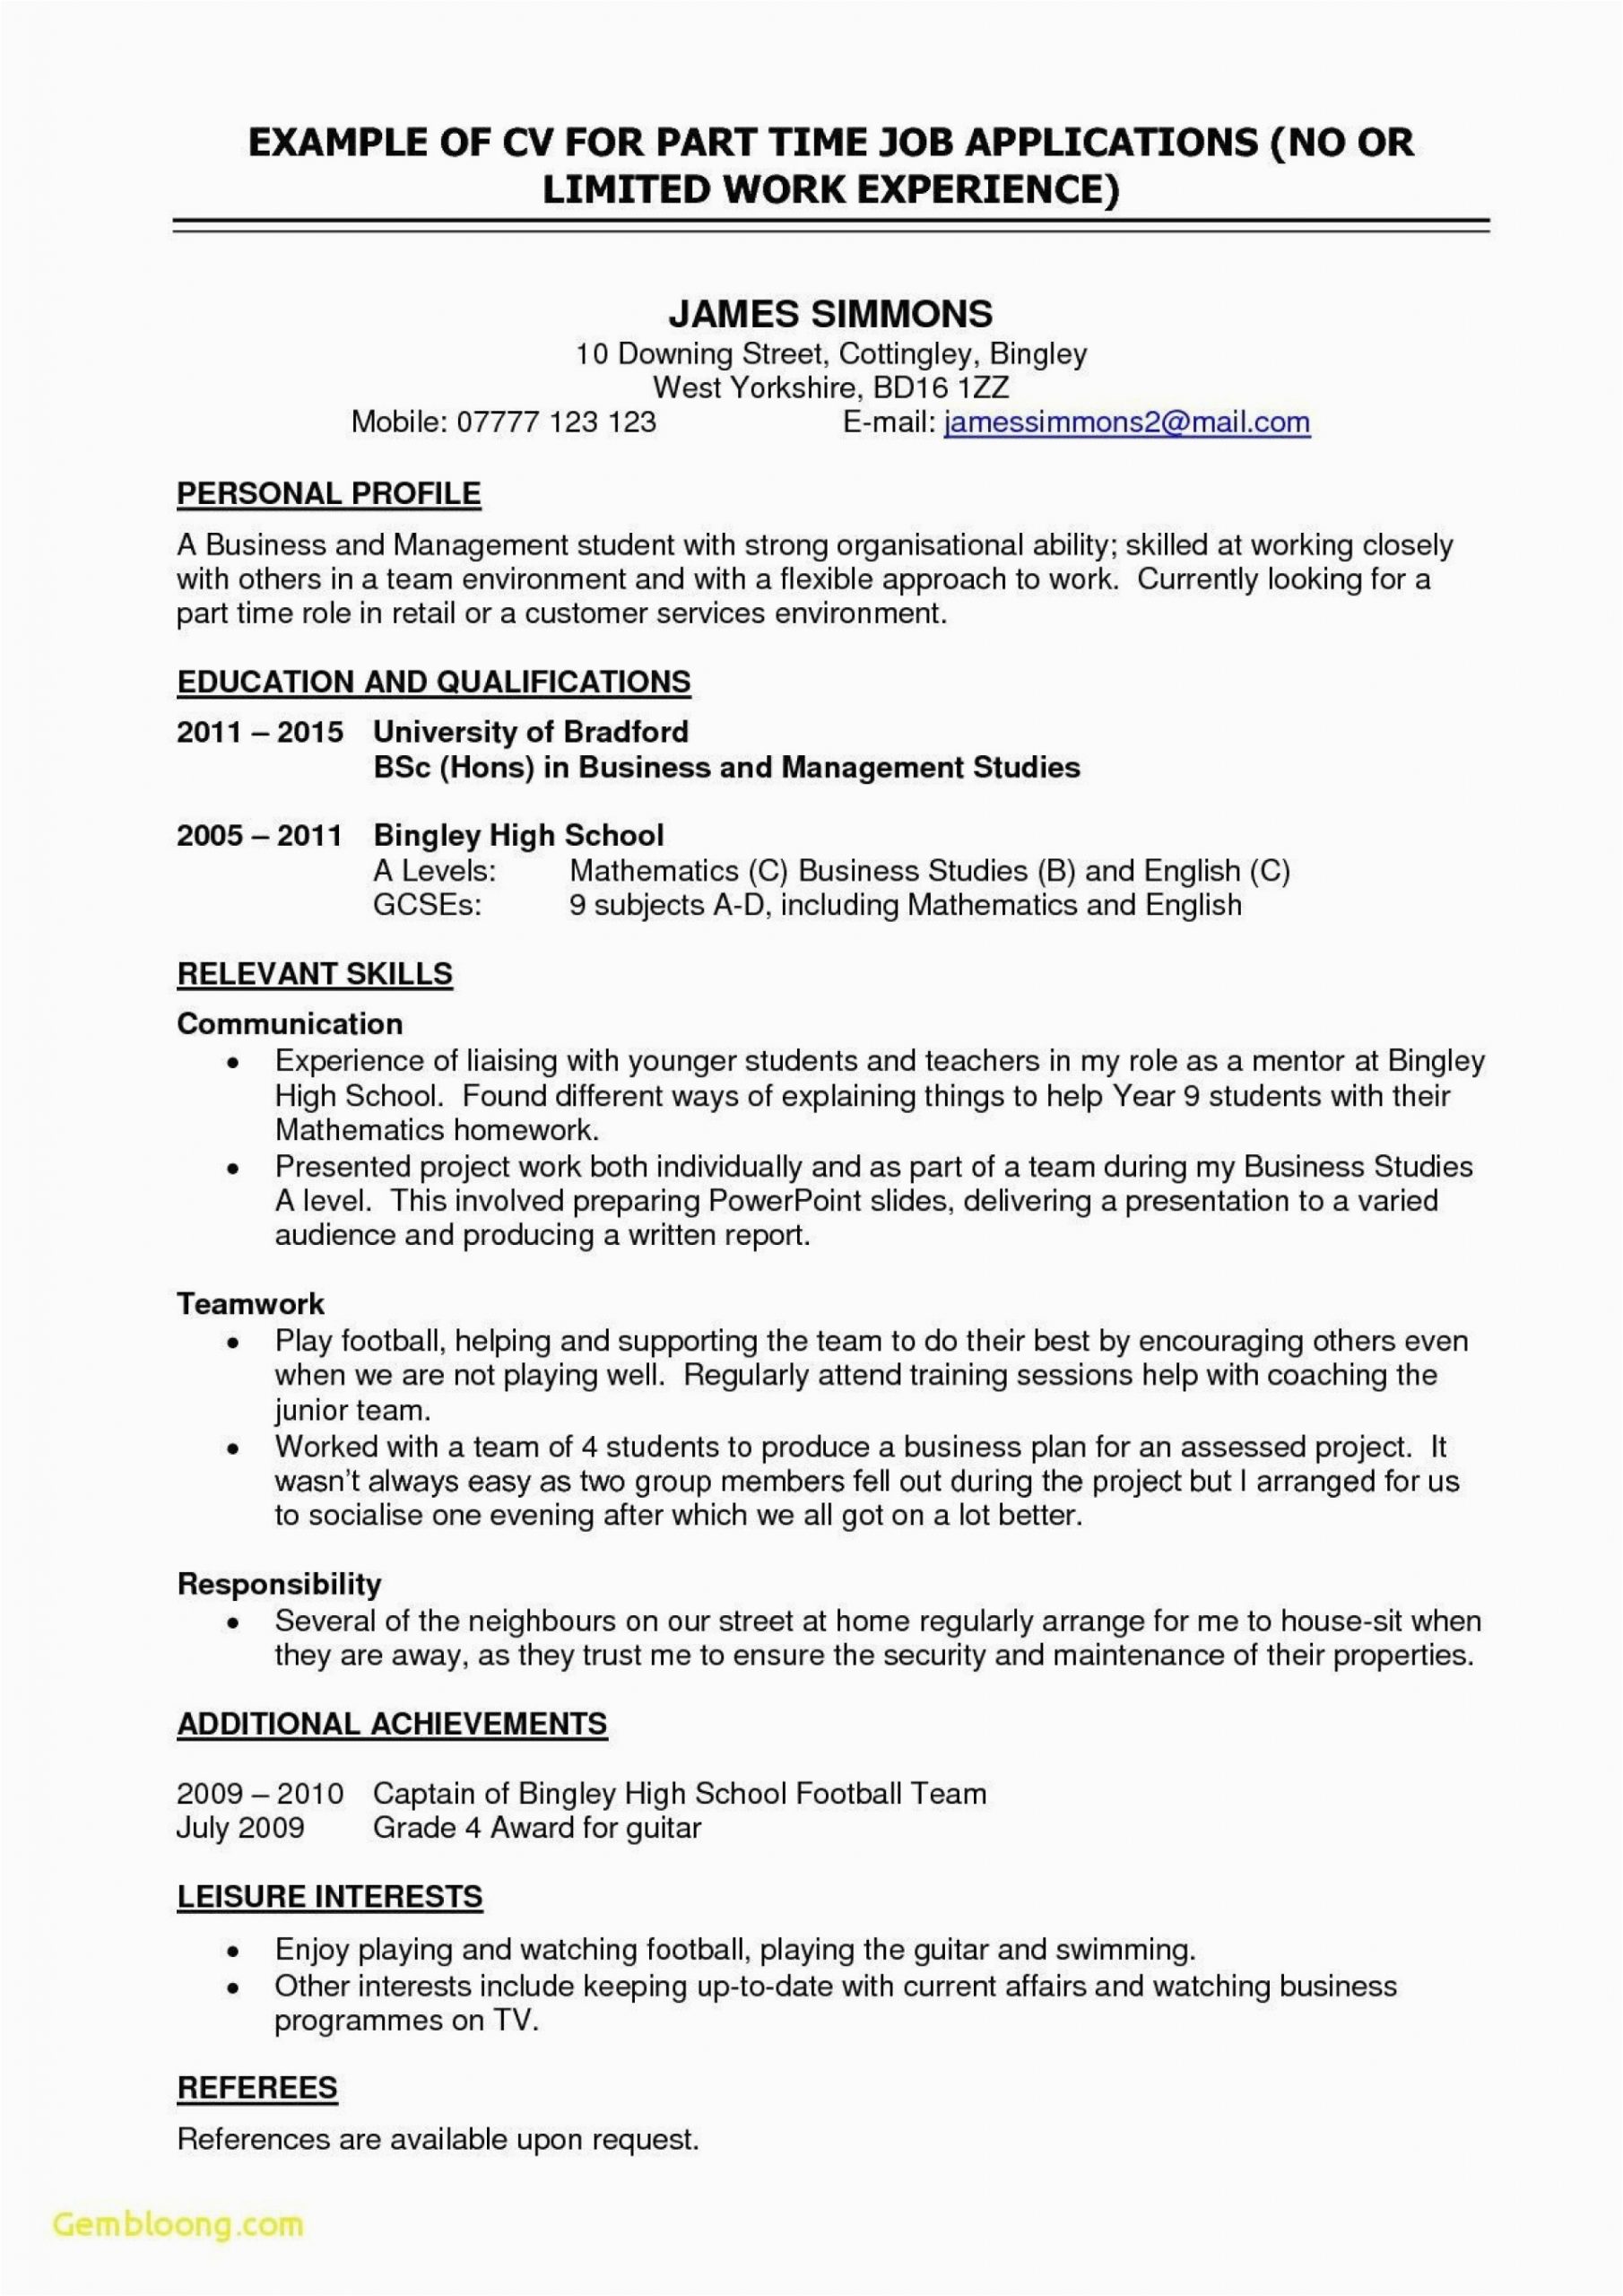 Resume for Part Time Job Student Sample Part Time Job Resume Template Addictionary